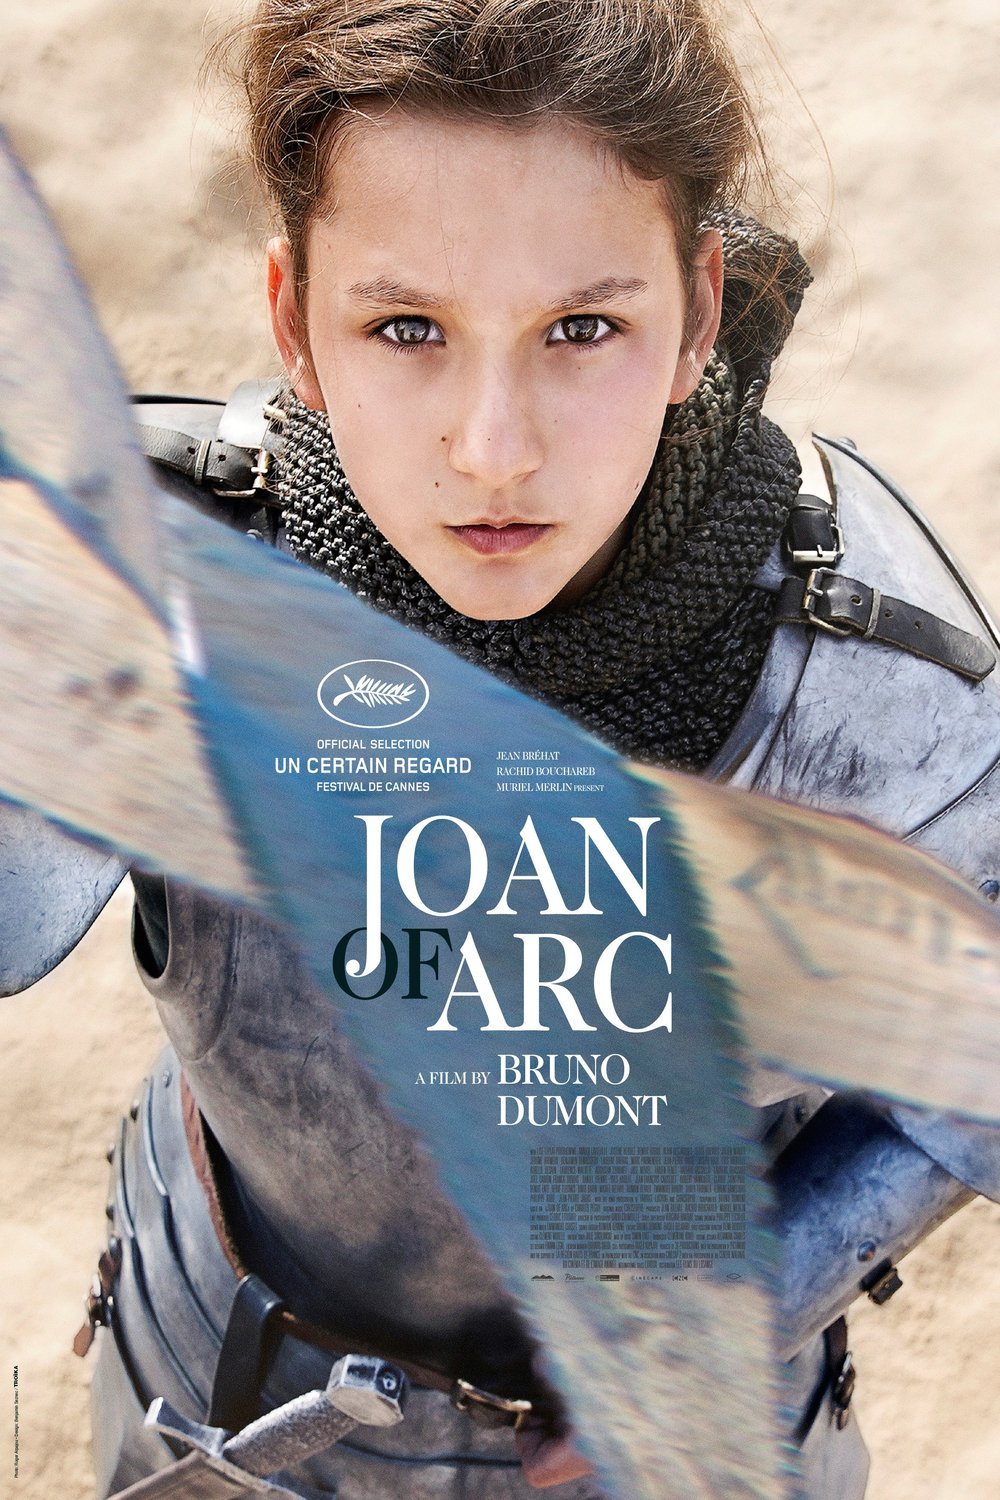 Poster of the movie Jeanne